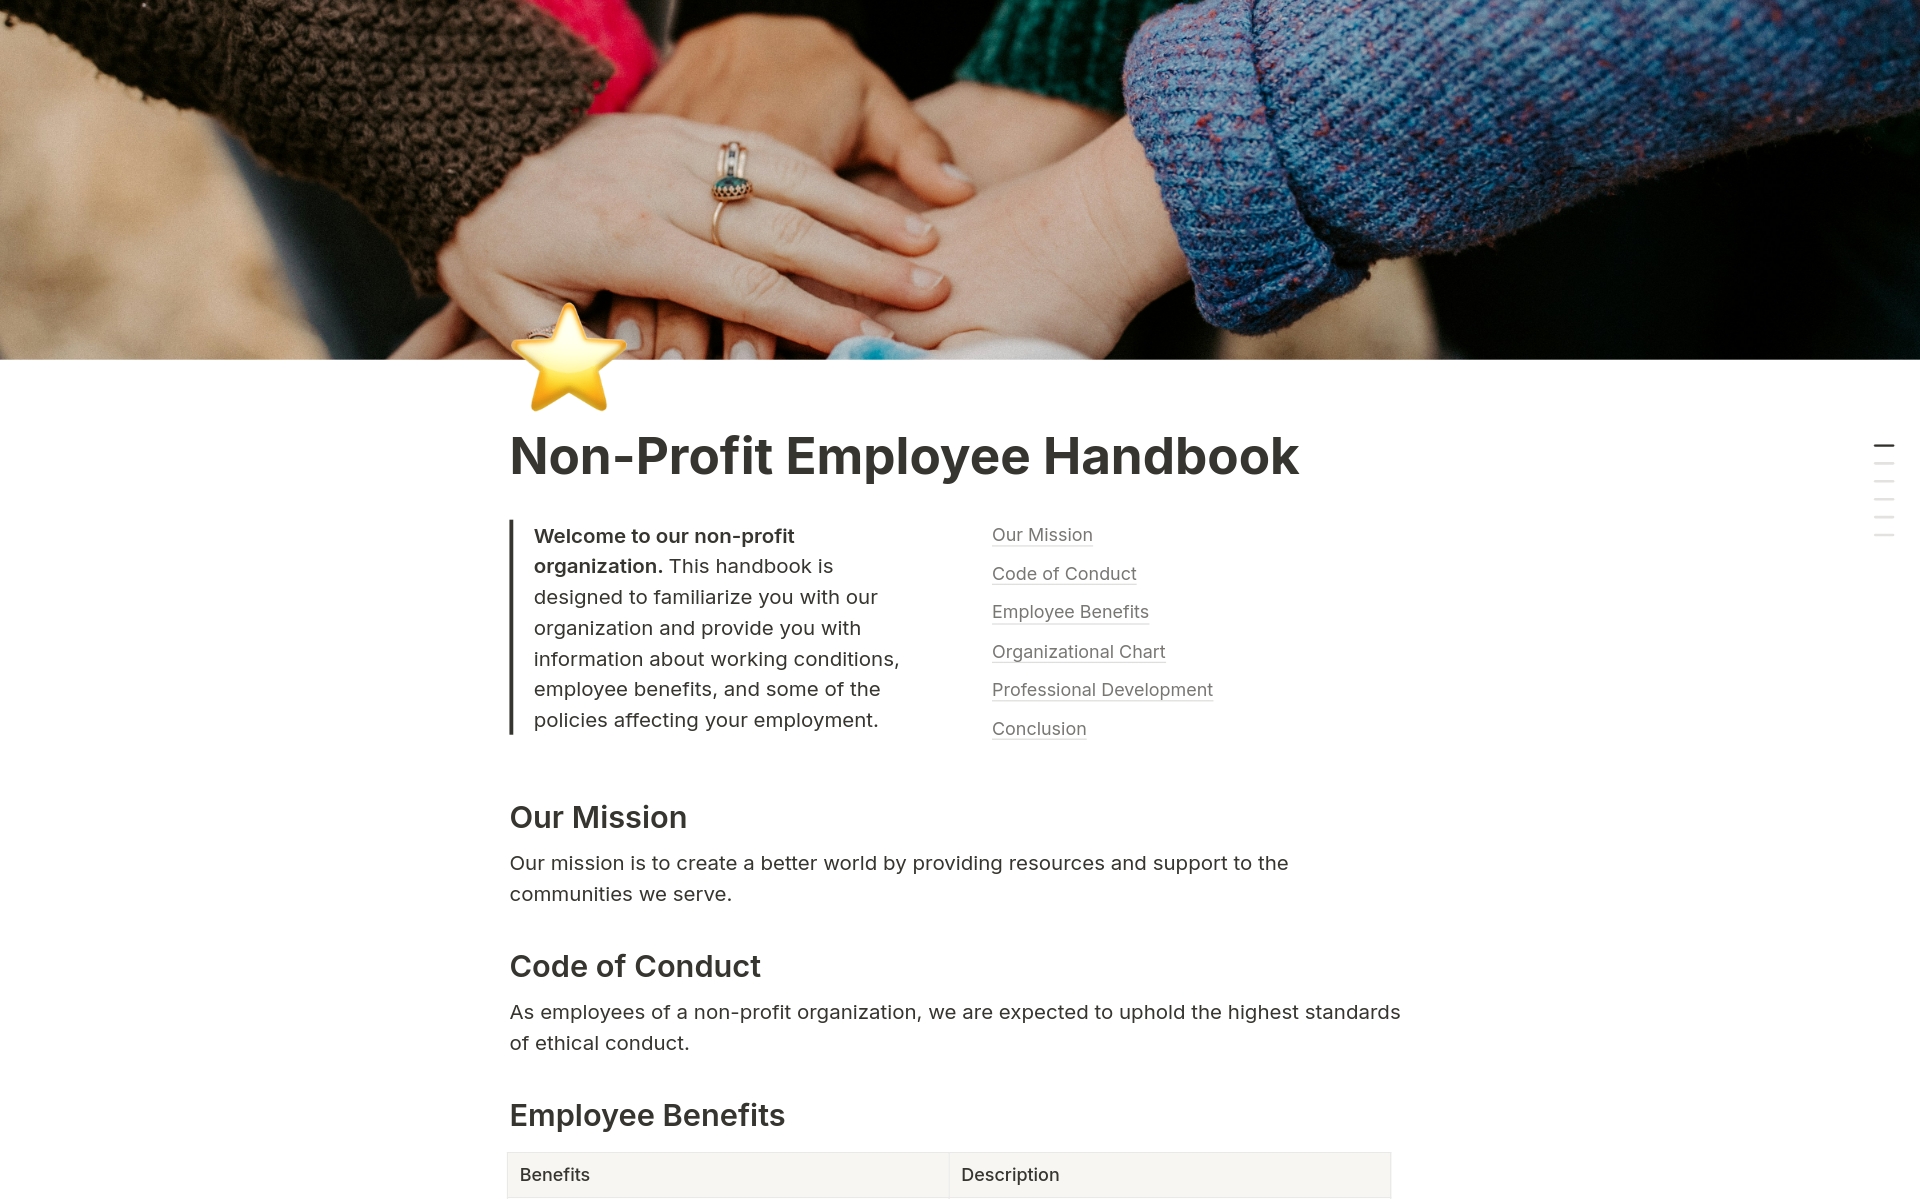 Comprehensive guide for non-profit employees, highlighting mission-driven policies, volunteer guidelines, and organizational values.